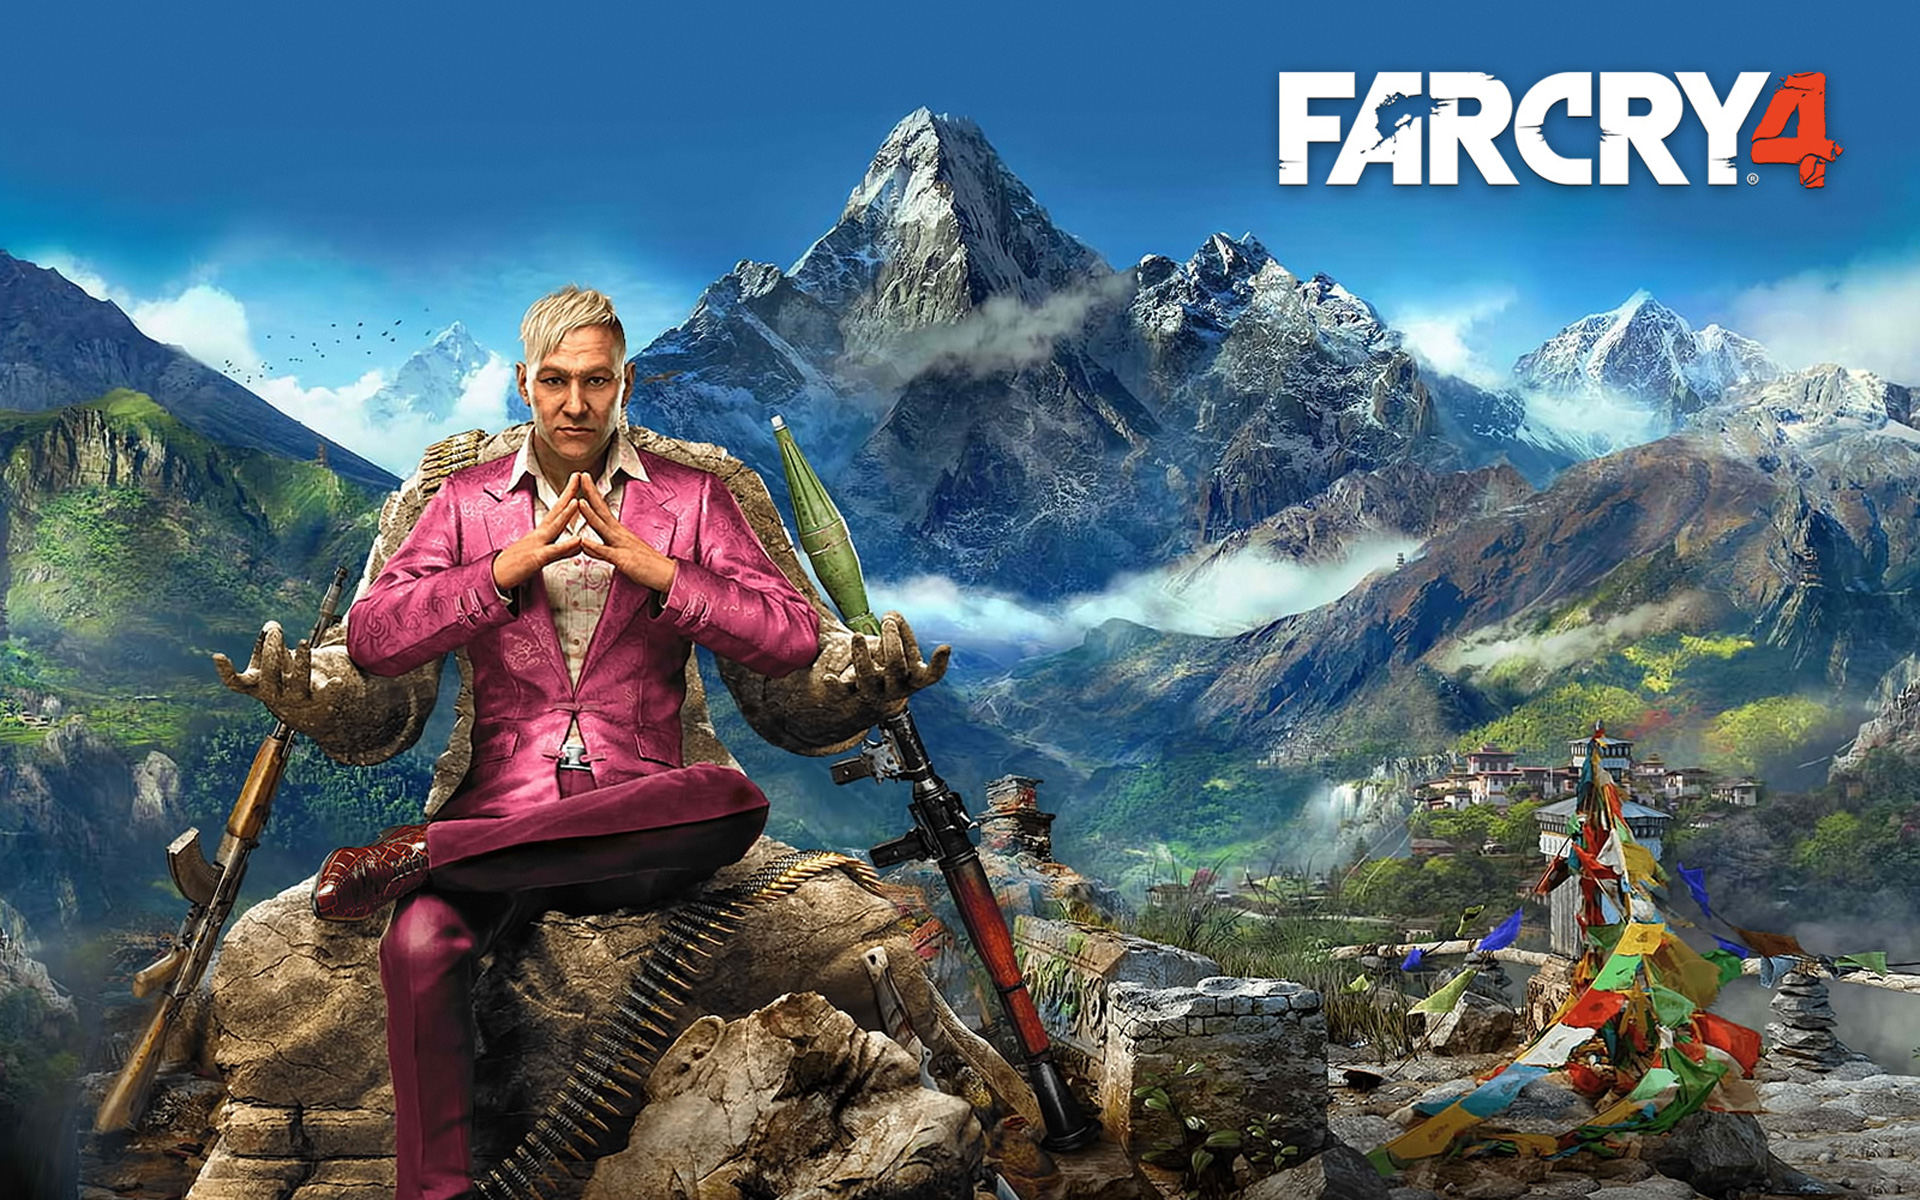 Far Cry 4 PC Game Full Version Cracked Setup Download Free